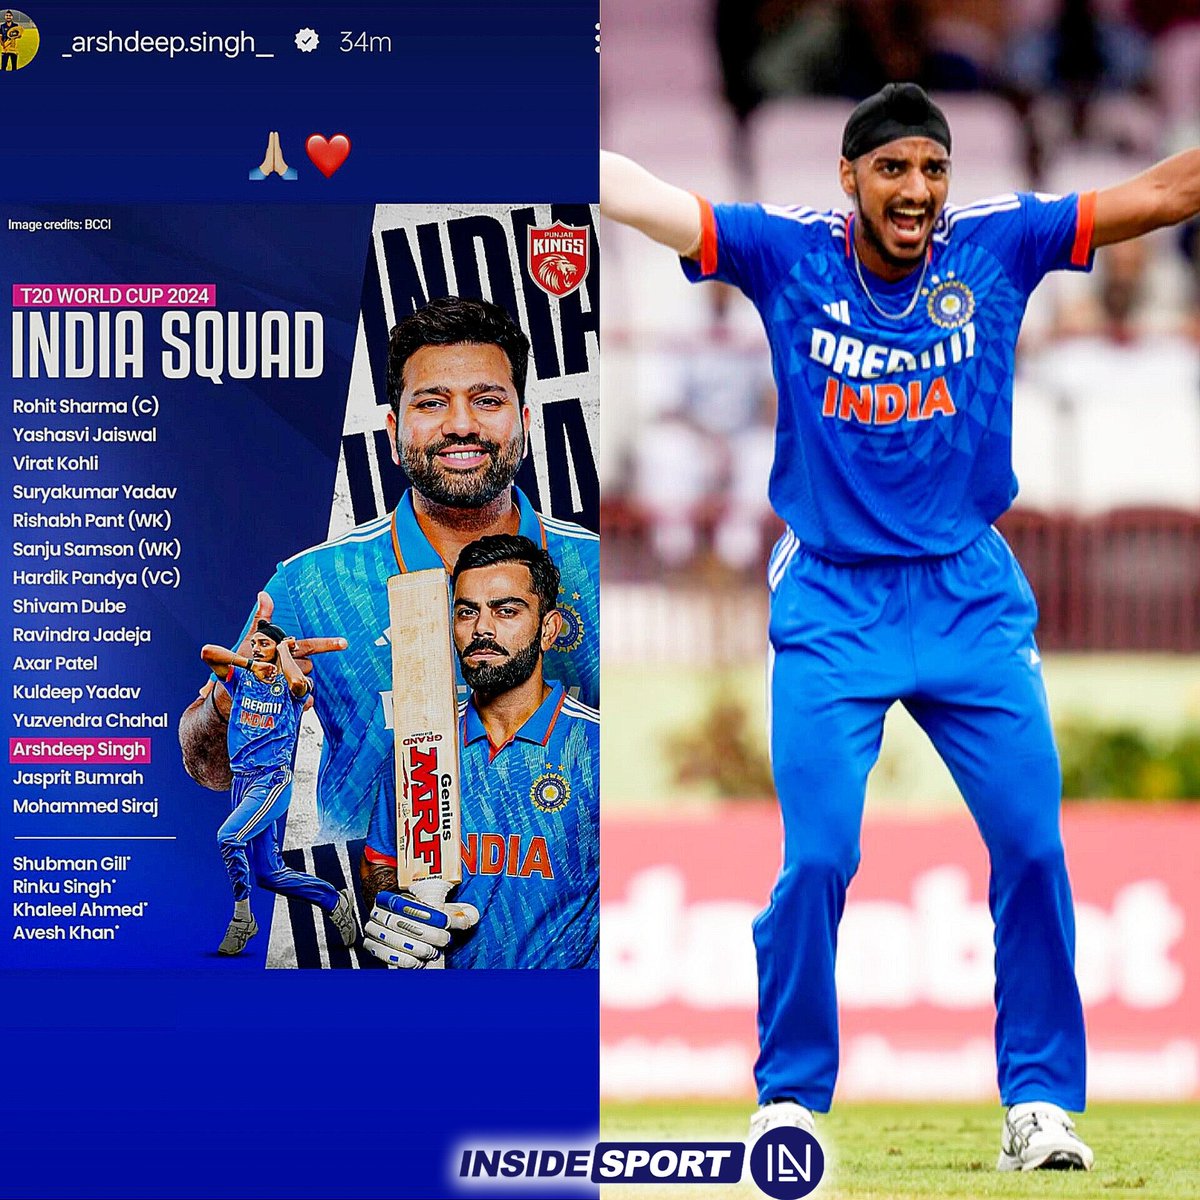 Arshdeep Singh feels blessed to be selected in India's squad for the 2024 T20 World Cup 👏🏻🏏

📷:- Arshdeep Singh/ Instagram 

#ArshdeepSingh #IndianCricketTeam #T20WorldCup2024 #Insidesport #CricketTwitter